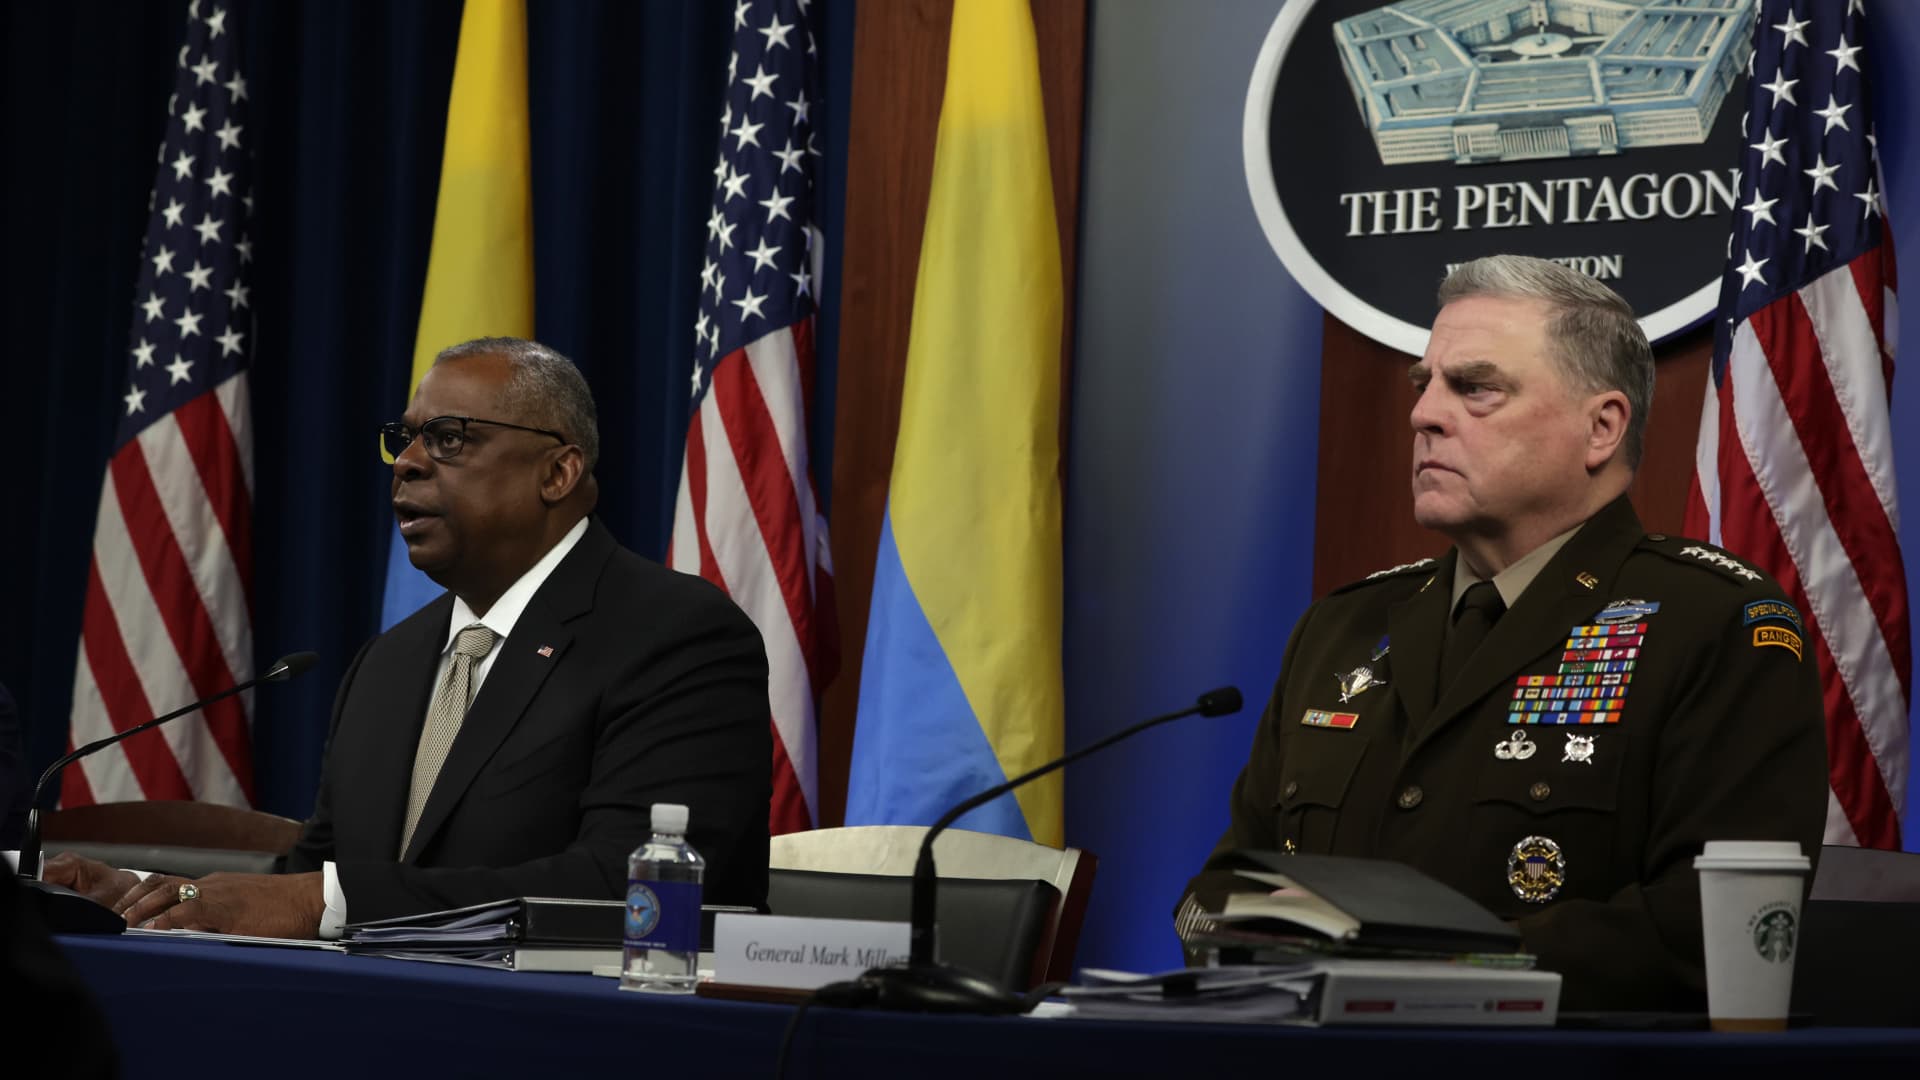 U.S. Secretary of Defense Lloyd Austin (L) gives opening remarks as Chairman of the Joint Chiefs of Staff General Mark Milley (R) listens during a virtual meeting of the Ukraine Defense Contact Group at the Pentagon May 23, 2022 in Arlington, Virginia.